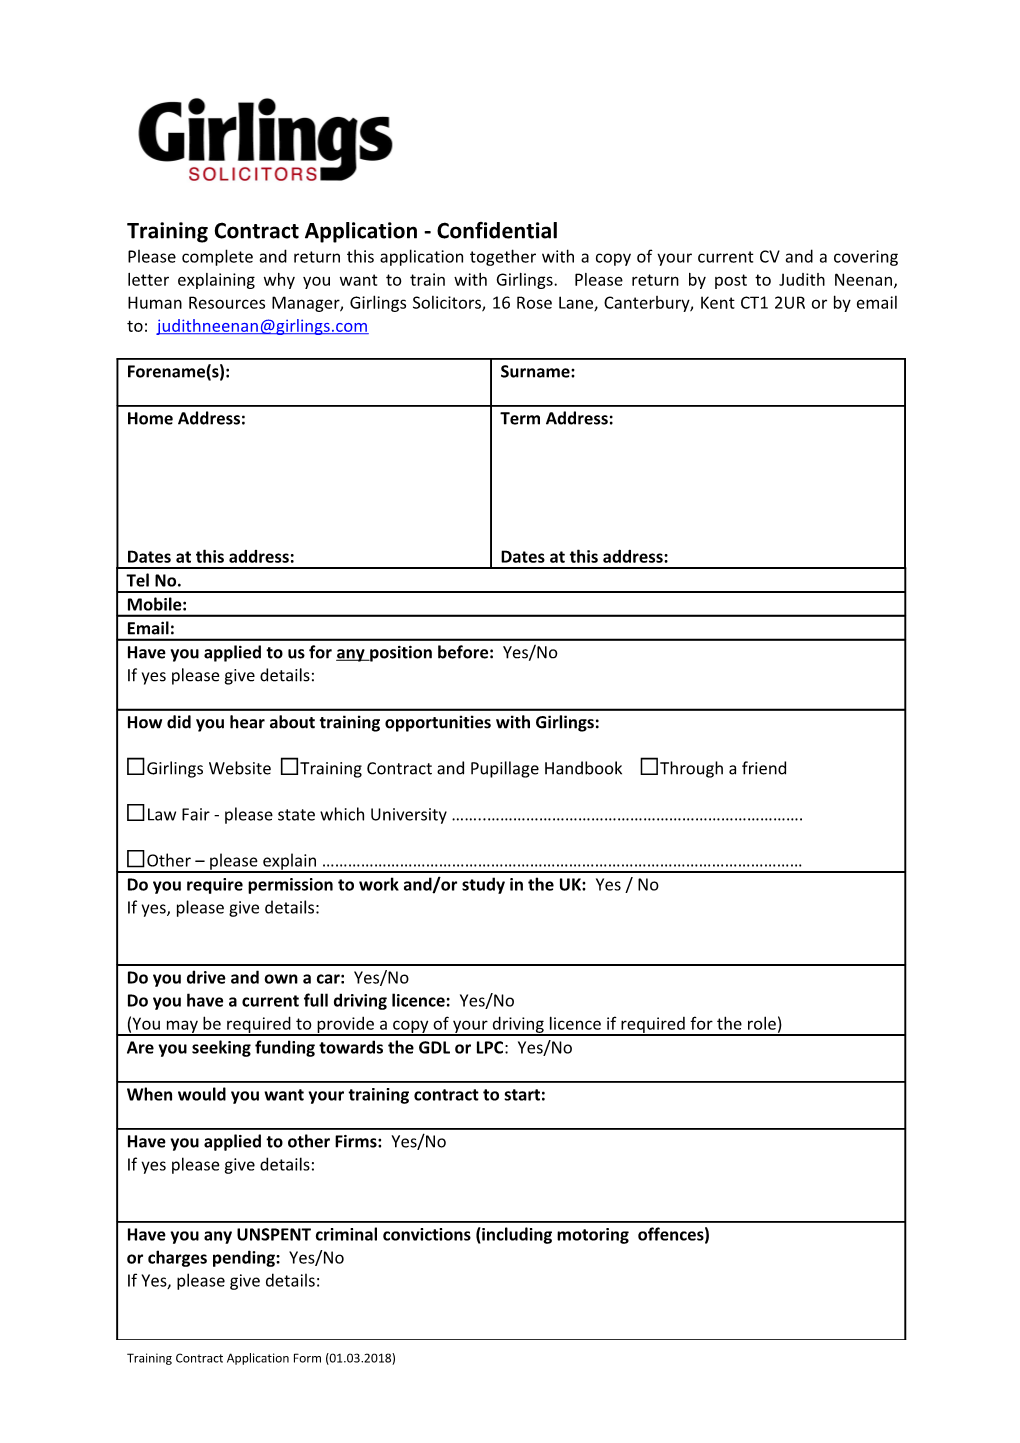 Training Contract Application- Confidential